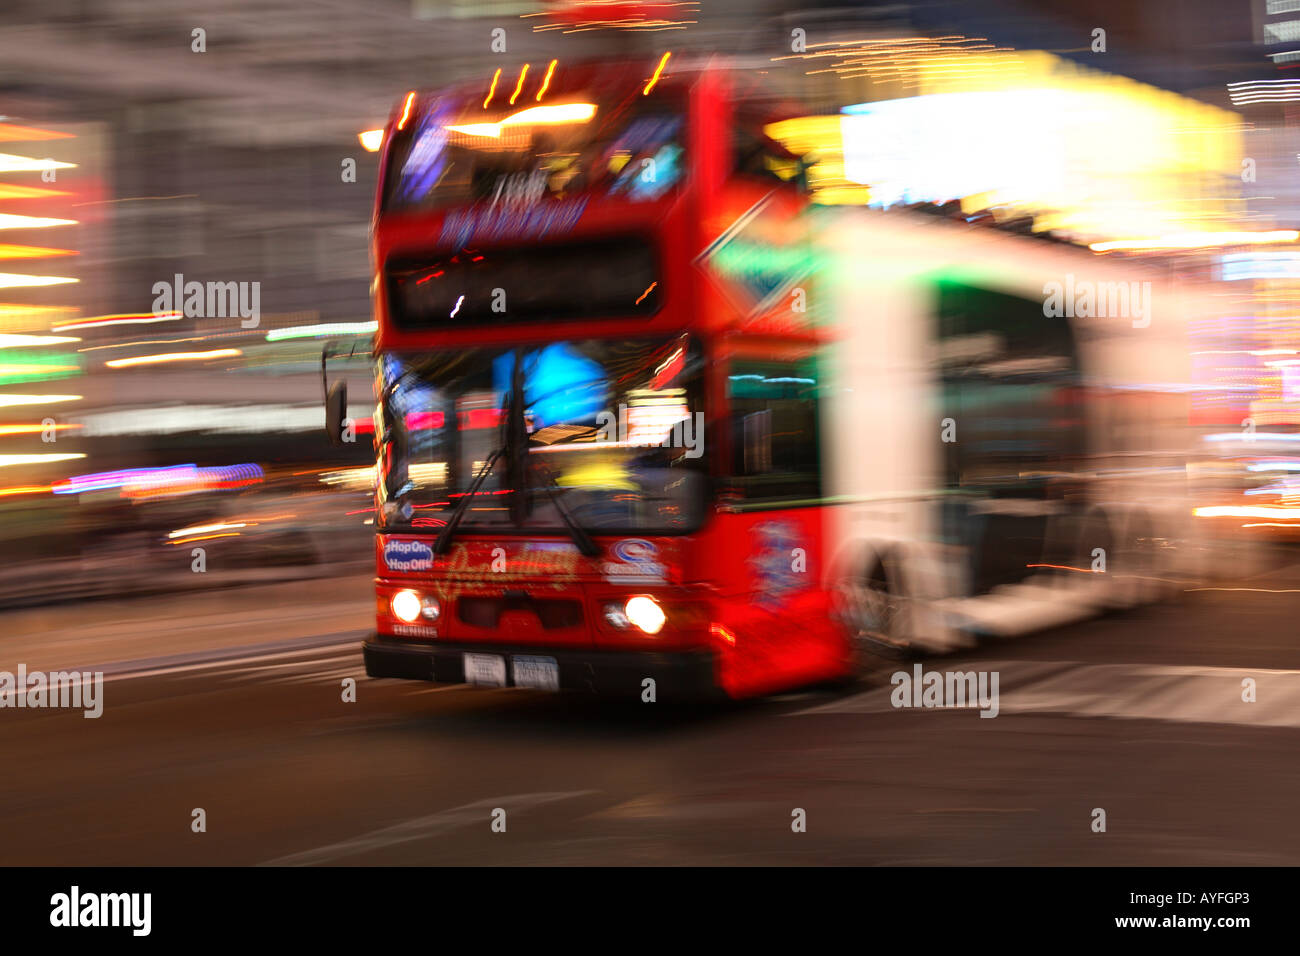 Tour Bus in Times Square, New York City Stock Photo